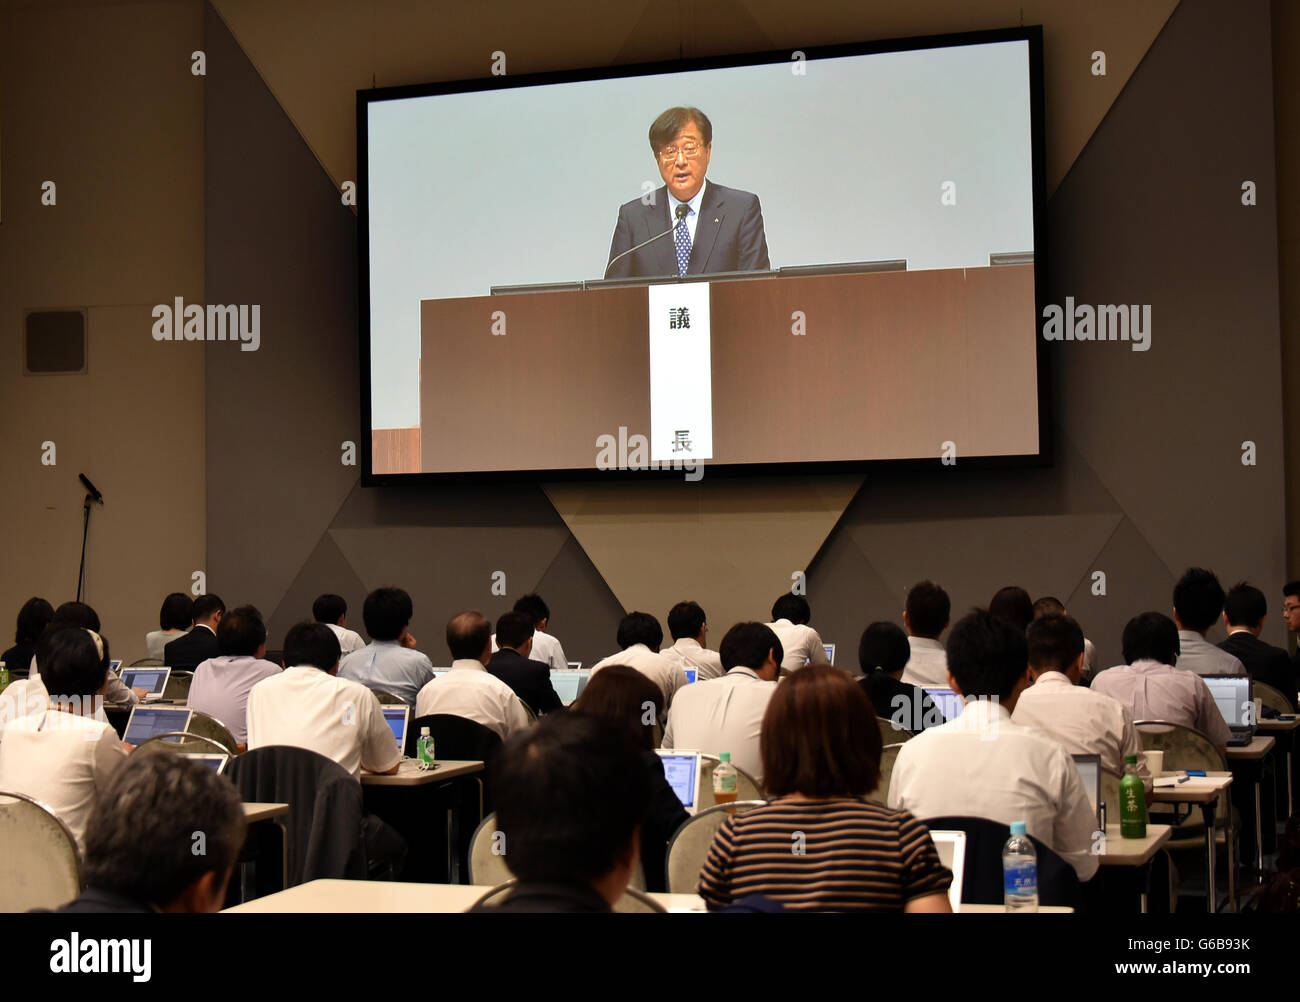 Makuhari, Japan. 24th June, 2016. Reporters take notes as Chairman Osamu Mashiko, on the monitor, of the trouble-stricken Mitsubishi Motors addresses a general stockholders meeting at Makuhari Messe, east of Tokyo, on Friday, June 24, 2016. The Japanese automaker forecast its first loss in eight years after setting aside compensation costs related to manipulating fuel-efficiency ratings and falsifying test data. Net loss in the year ending March 31 will probably be $1.4 billion, the company said in a statement Wednesday. Credit:  Natsuki Sakai/AFLO/Alamy Live News Stock Photo